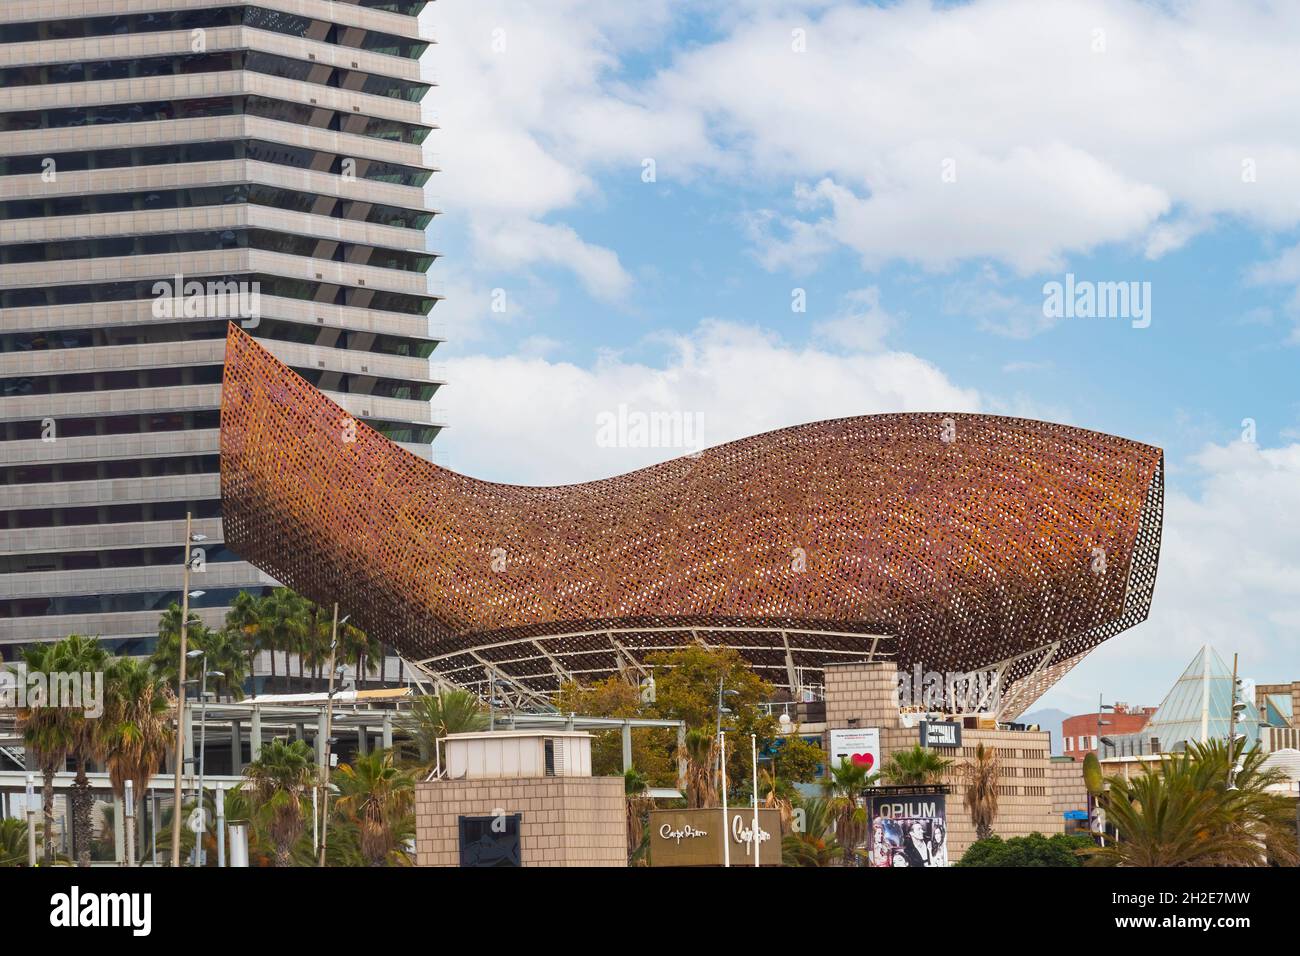 Barcelona, Spain - September 24, 2021: Sculpture of the Golden Fish, located in the Port Olimpic, the Olympic Port. It is a structure made up with fin Stock Photo